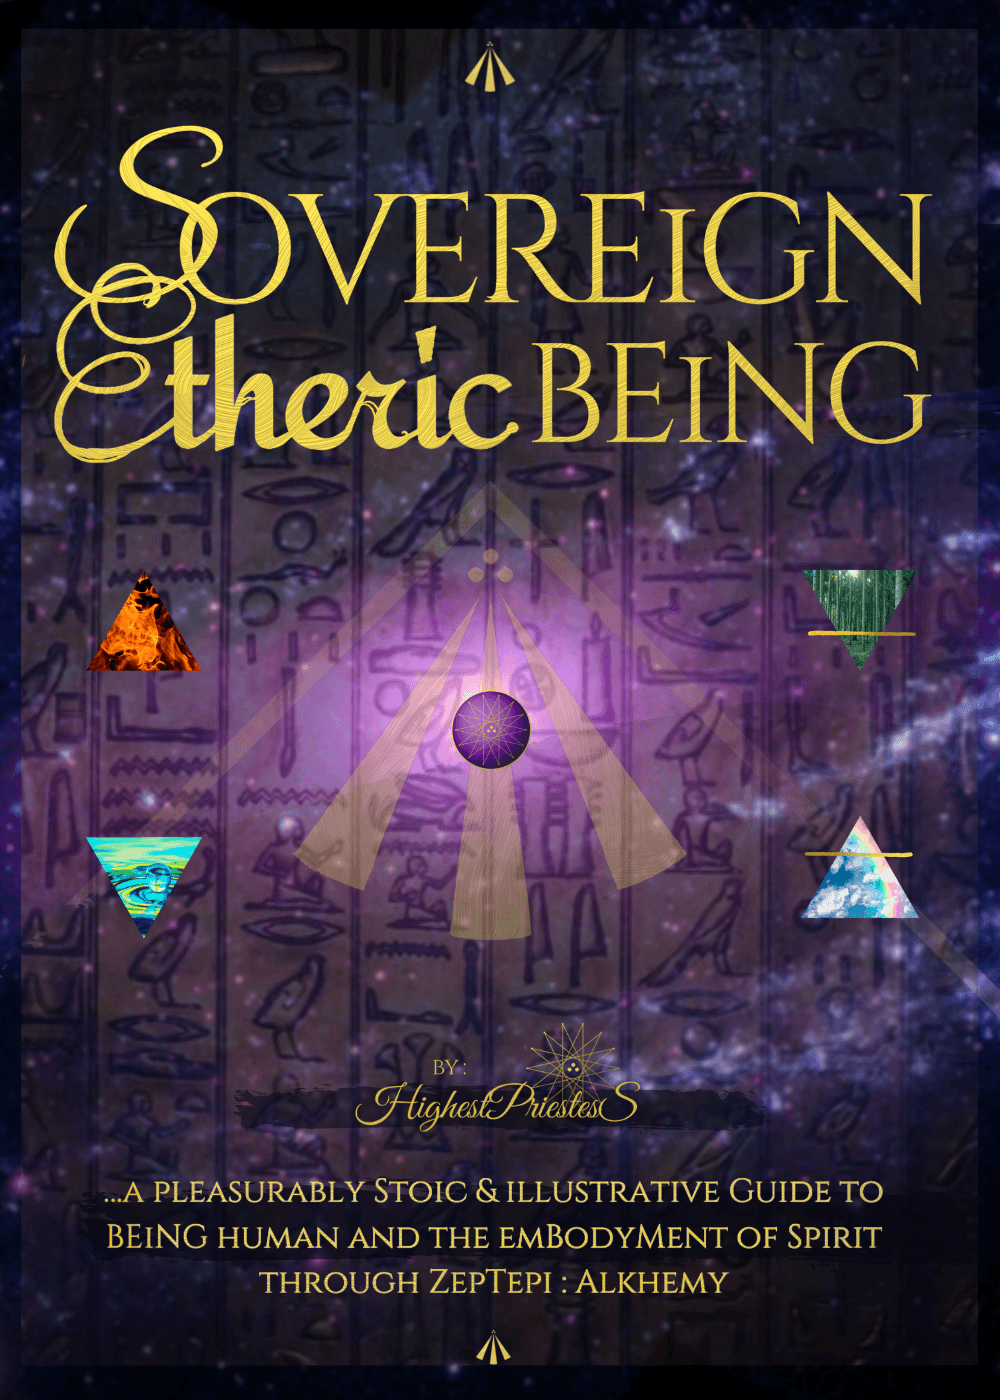 Sovereign Etheric Being